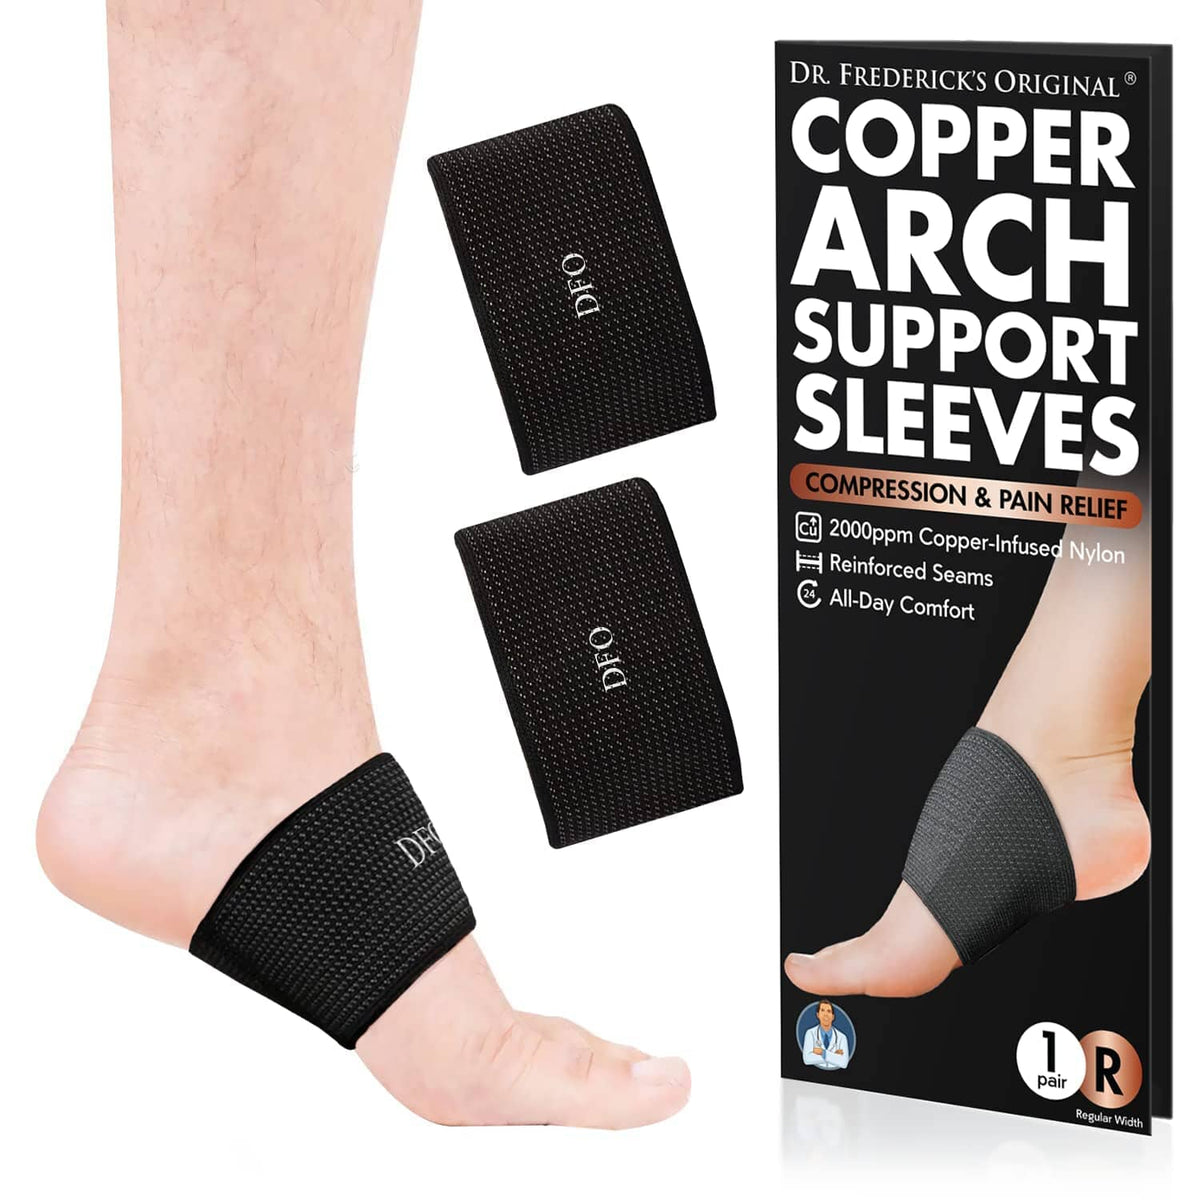 Dr. Frederick’s Original Copper Infused Arch Support Sleeves - 2pcs - Arch Support Bands for Plantar Fasciitis, Flat Feet, Fallen Arches - Fast Pain Relief - Arch Support Braces for Women &amp; Men Foot Pain Dr. Frederick&#39;s Original 